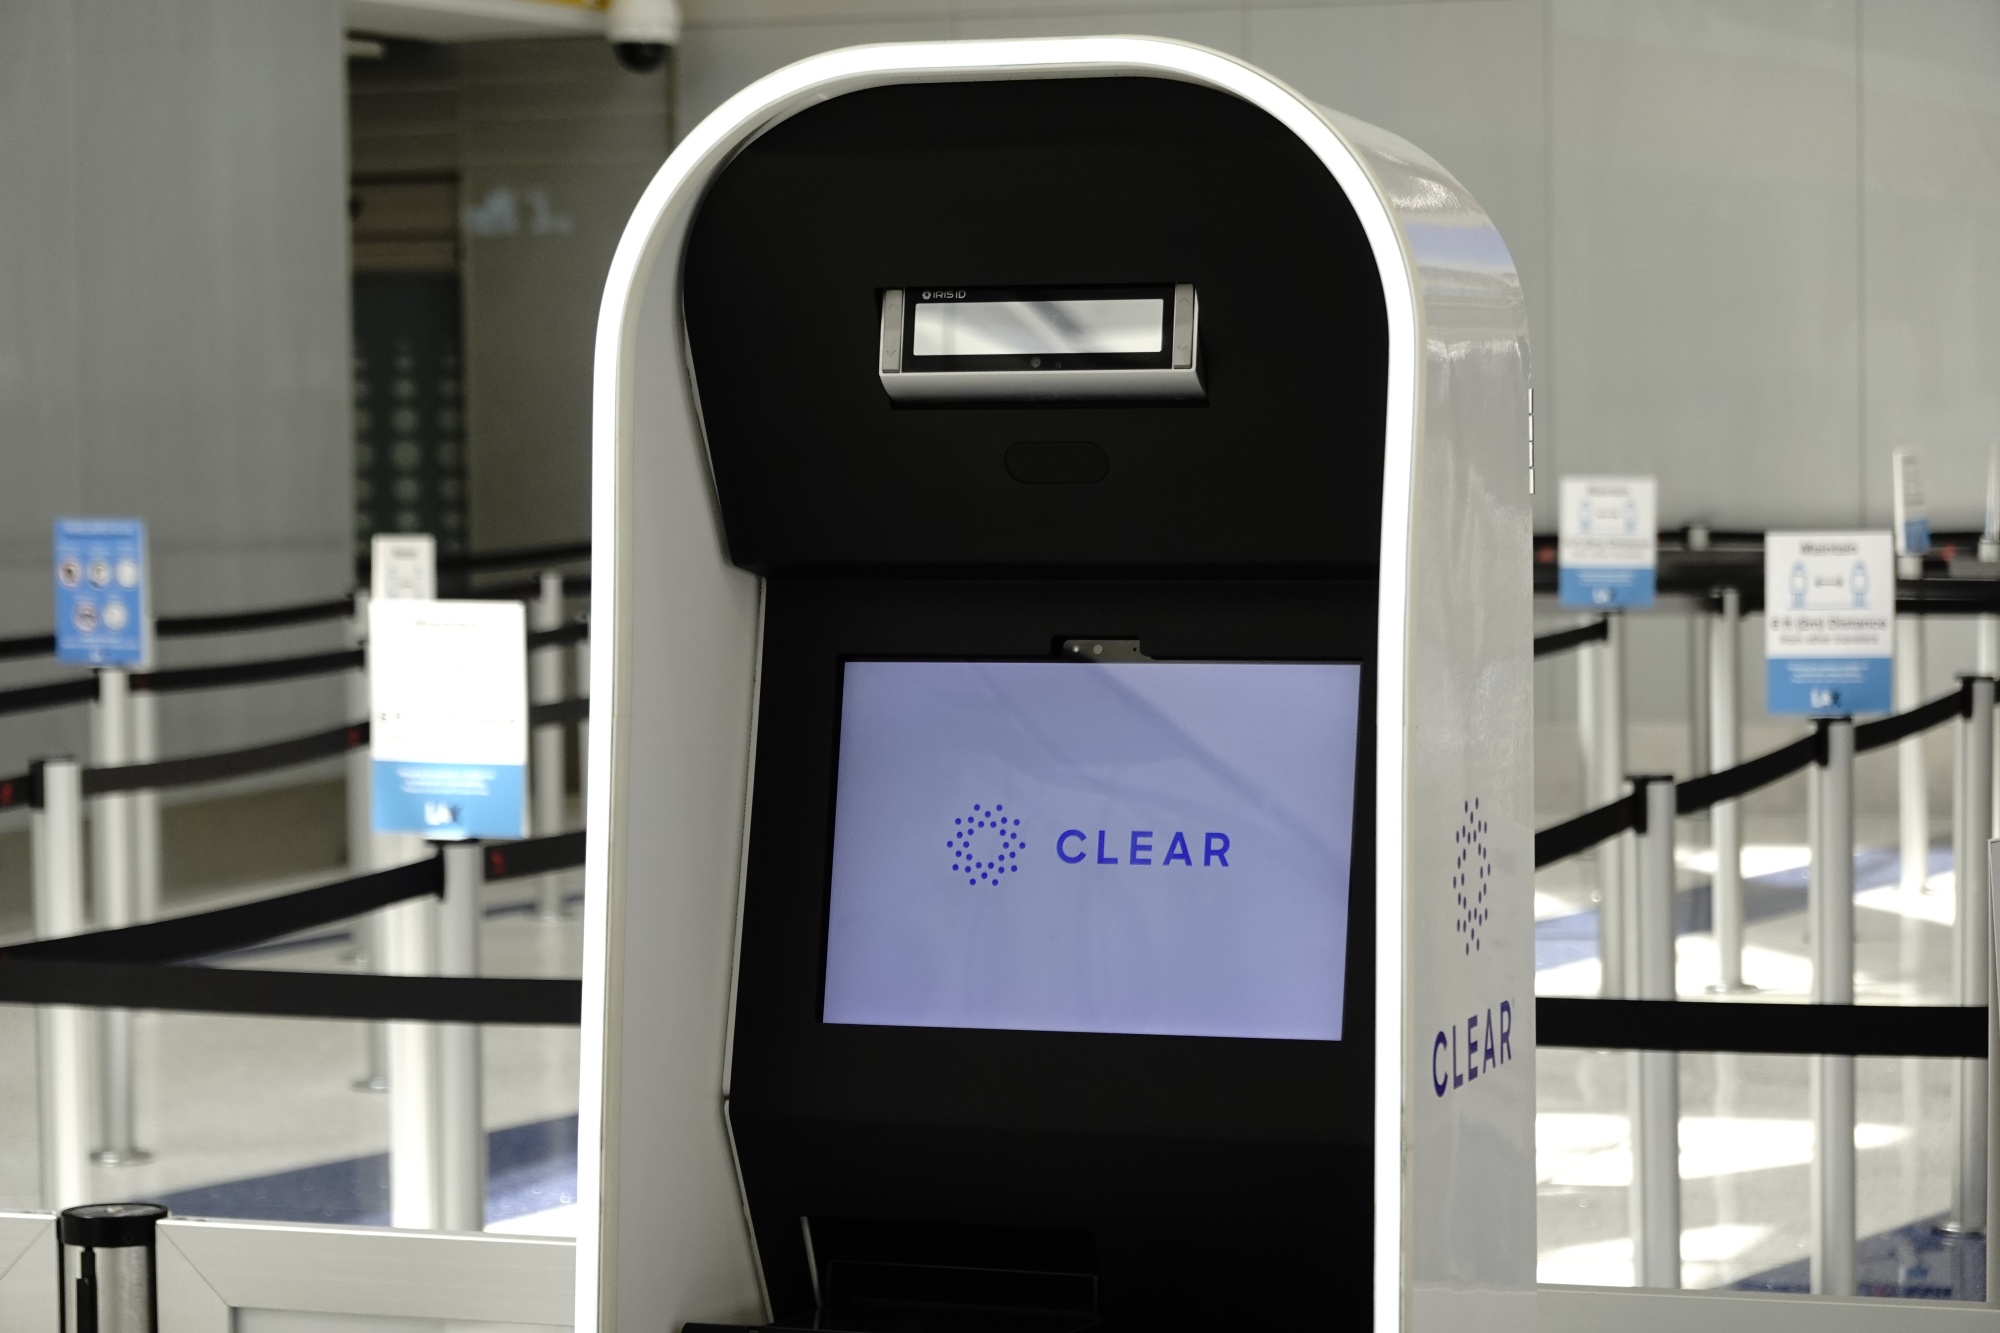 CLEAR - Expedited Airport Security Program [Worth It?]